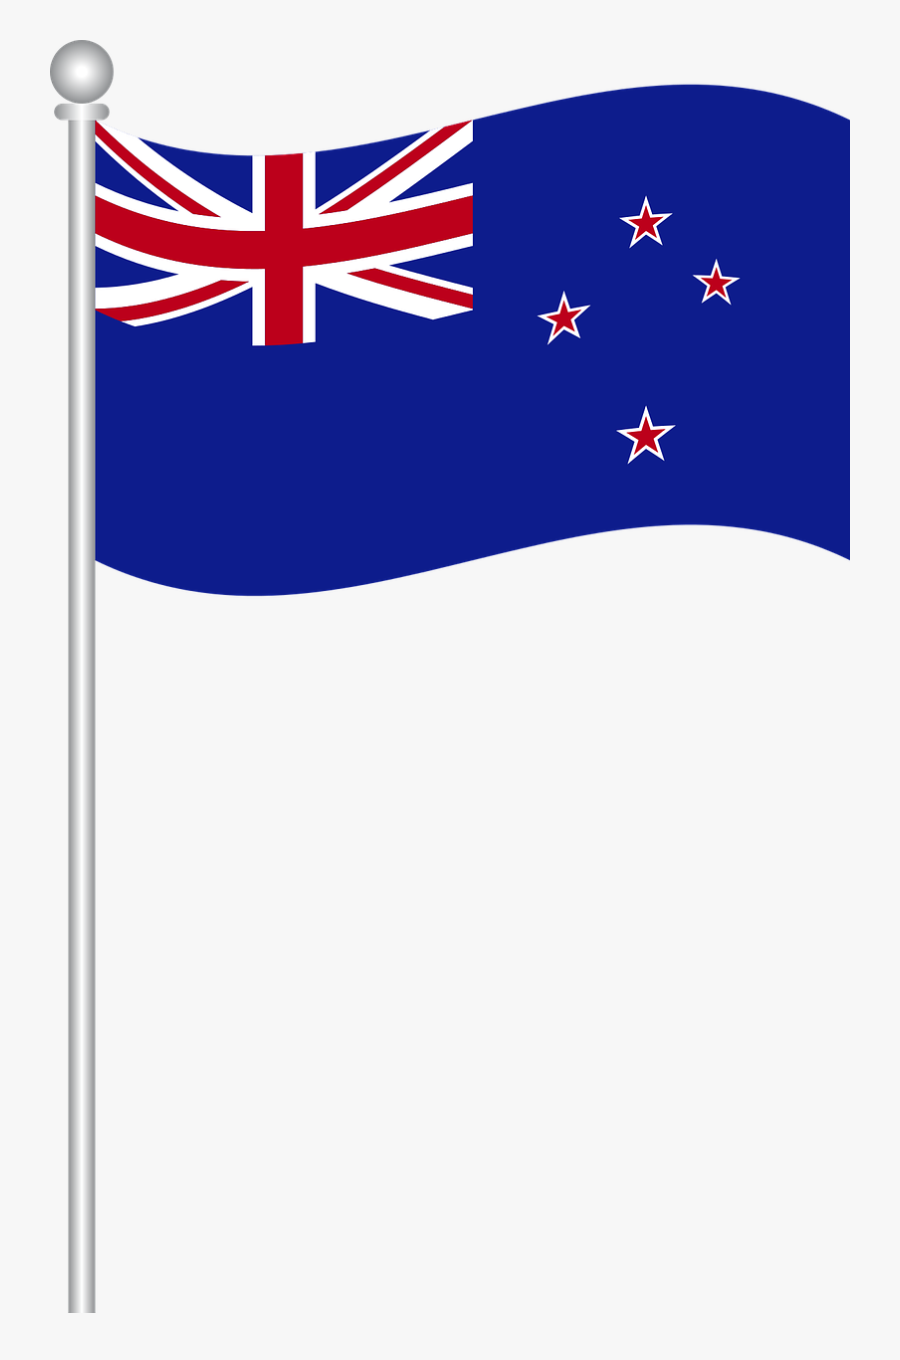 Flag Of New Zealand Flag New Zealand Free Picture - New Zealand Flag Cartoon, Transparent Clipart